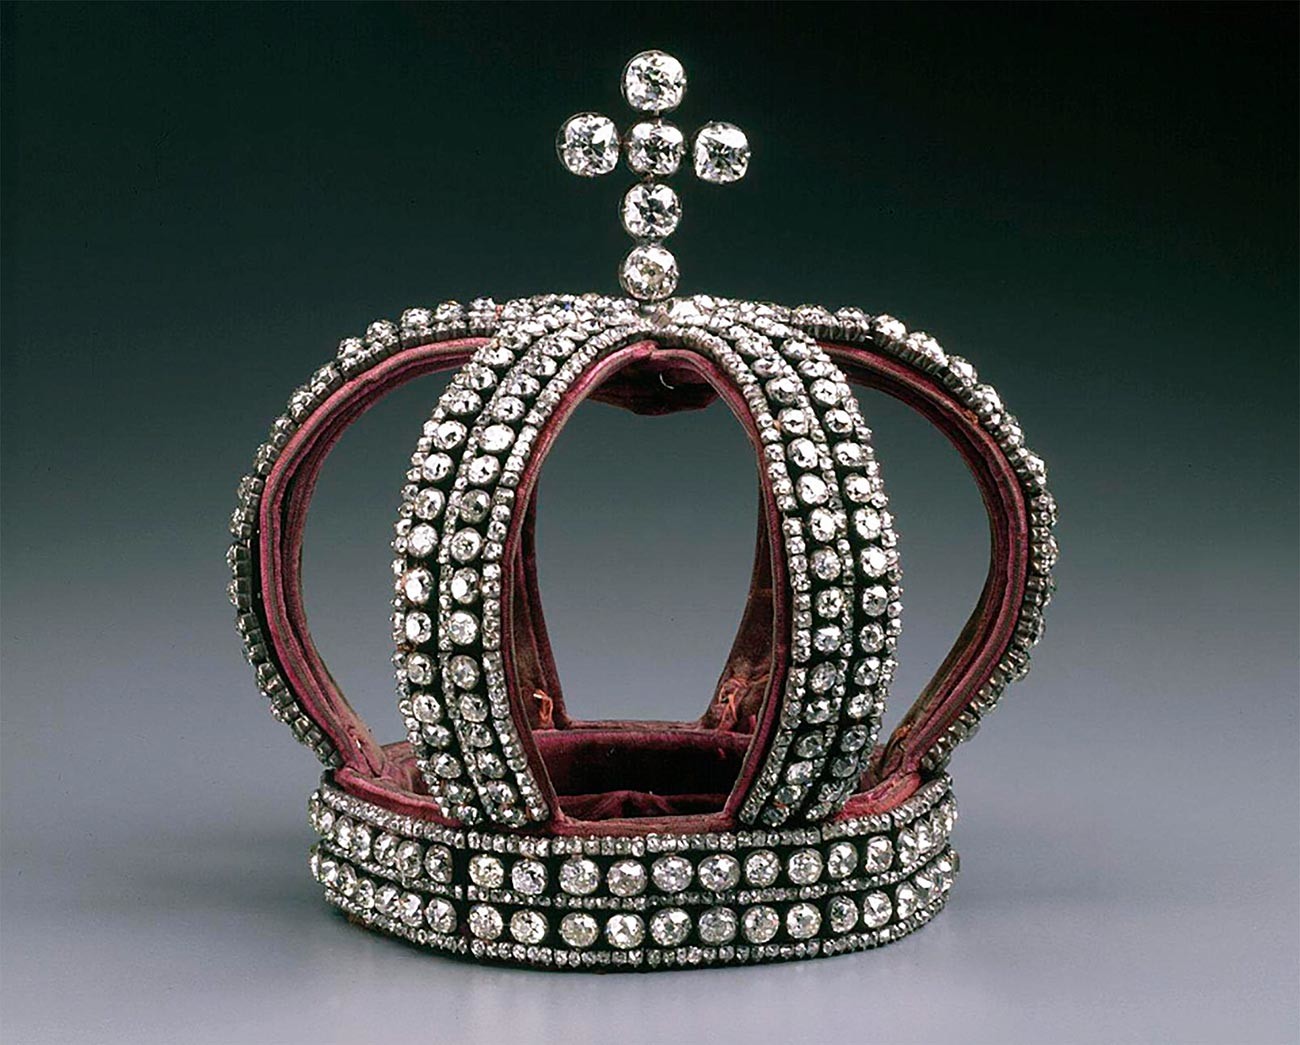 The imperial crown of the Romanovs